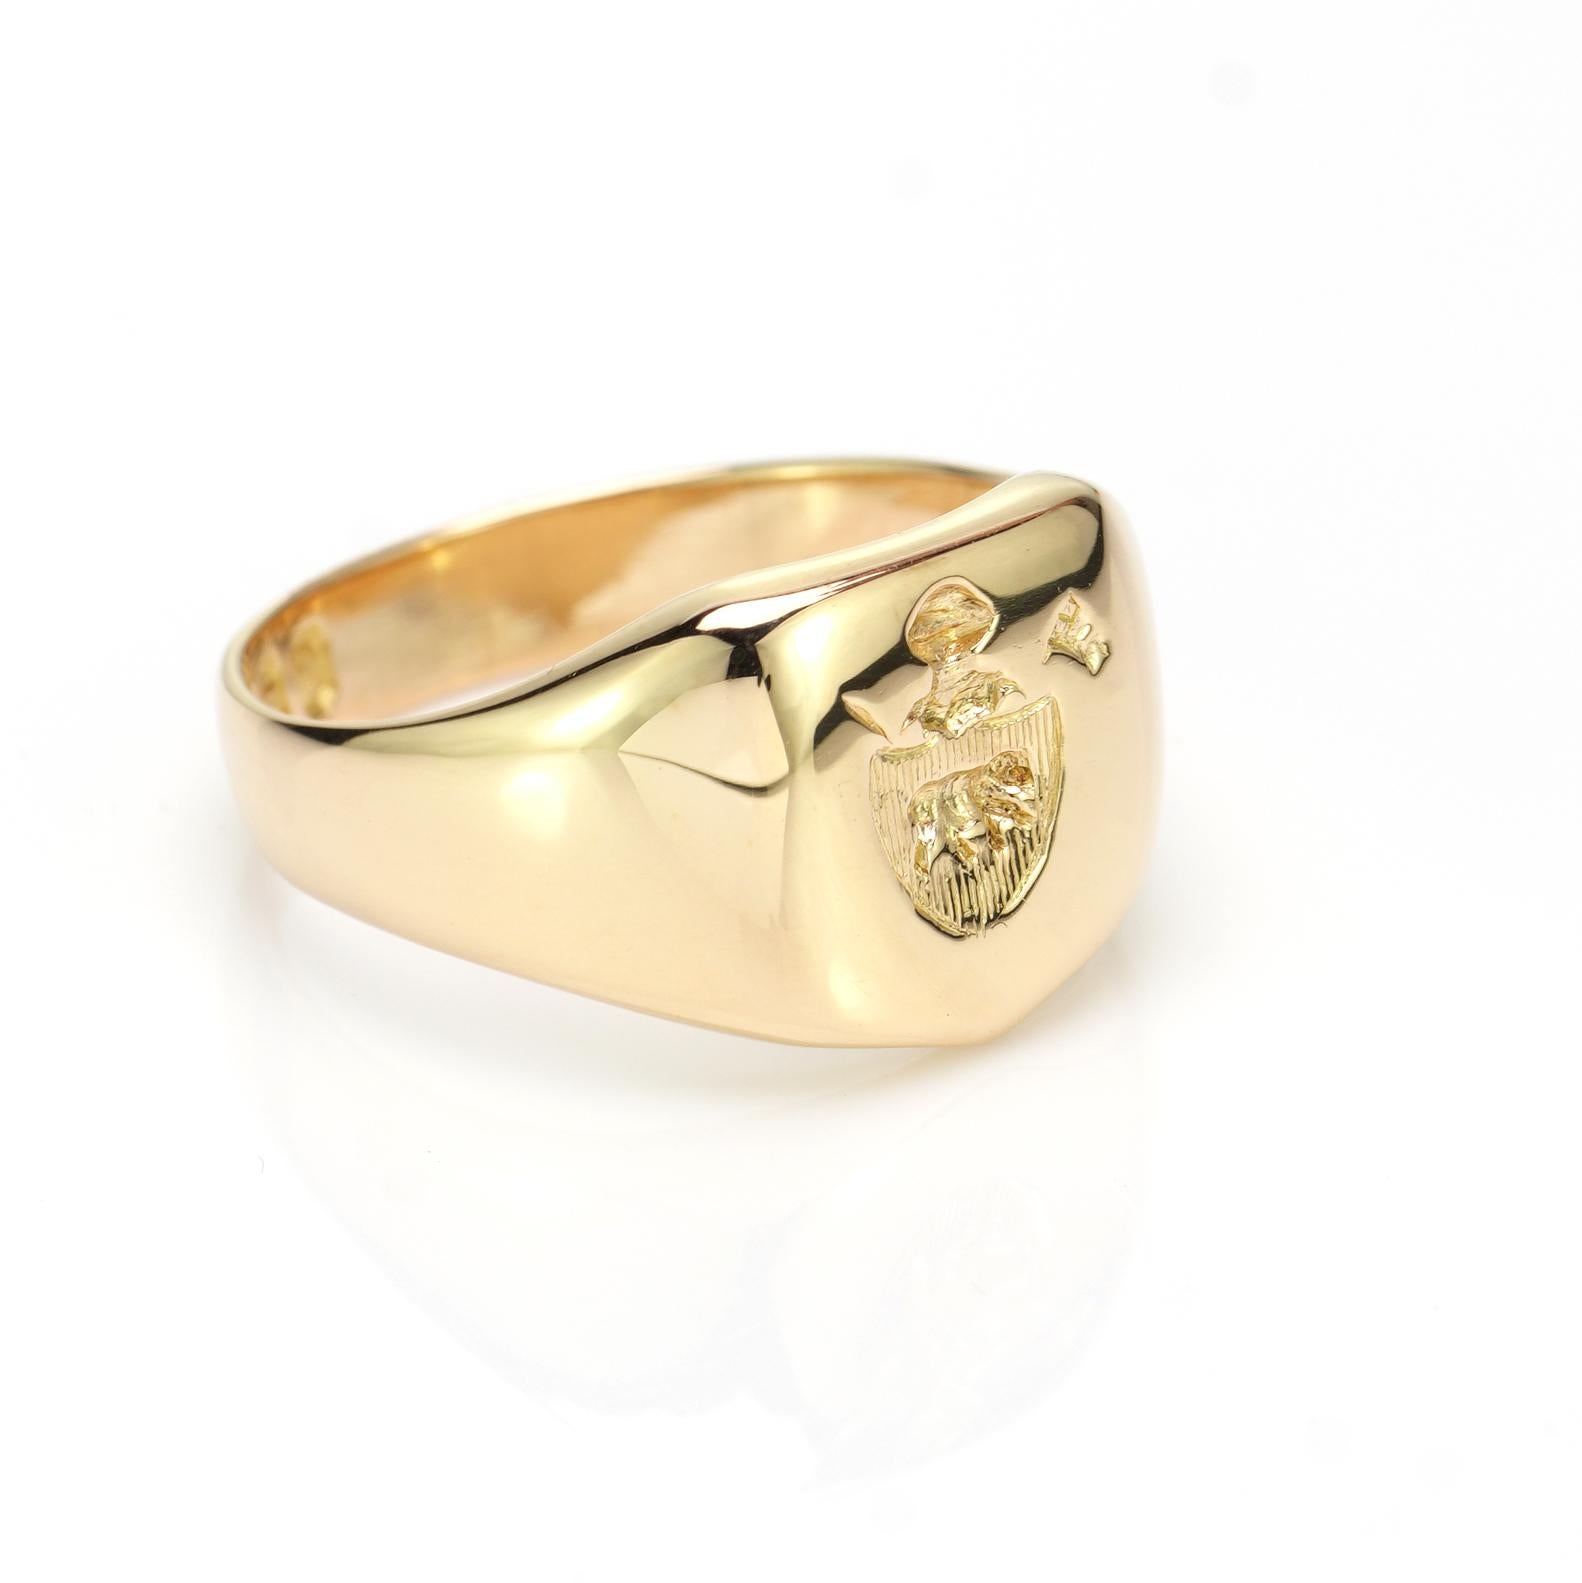 Vintage 18kt. Yellow Gold Signet Ring with Coat of Arms 1